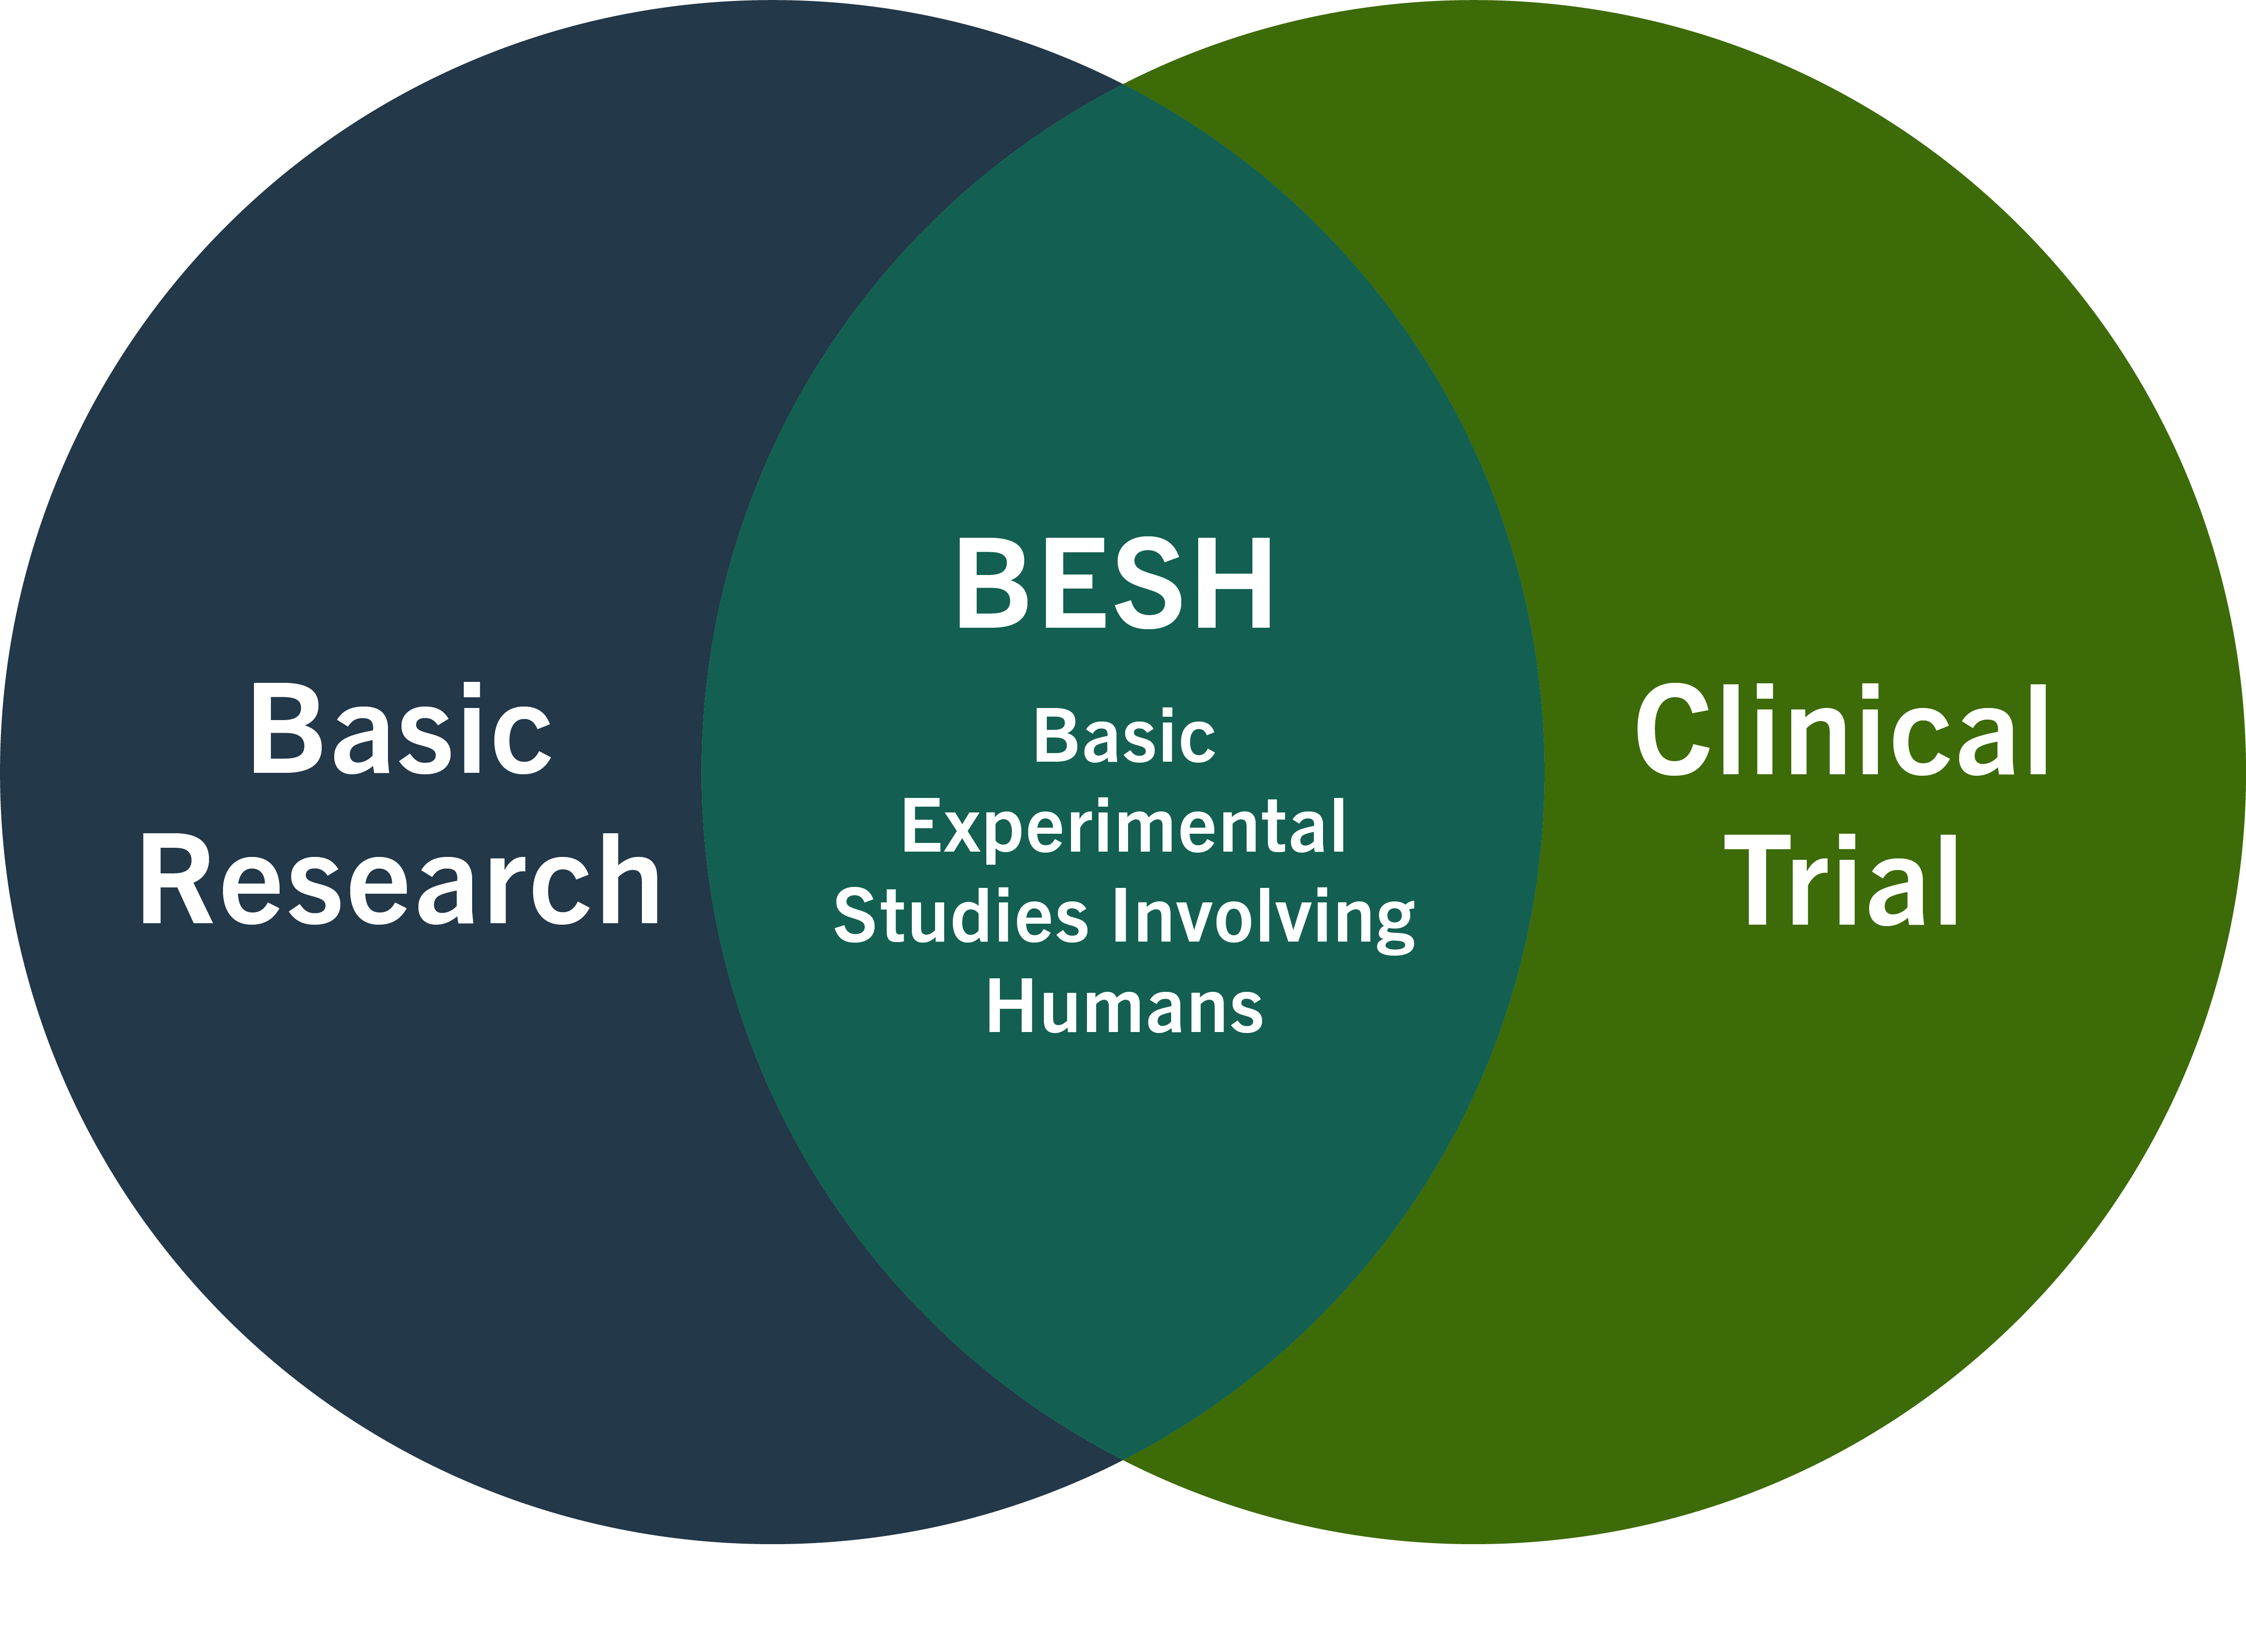 Venn Diagram showing Basic Research and Clinical Trials met with BESH at the overlap